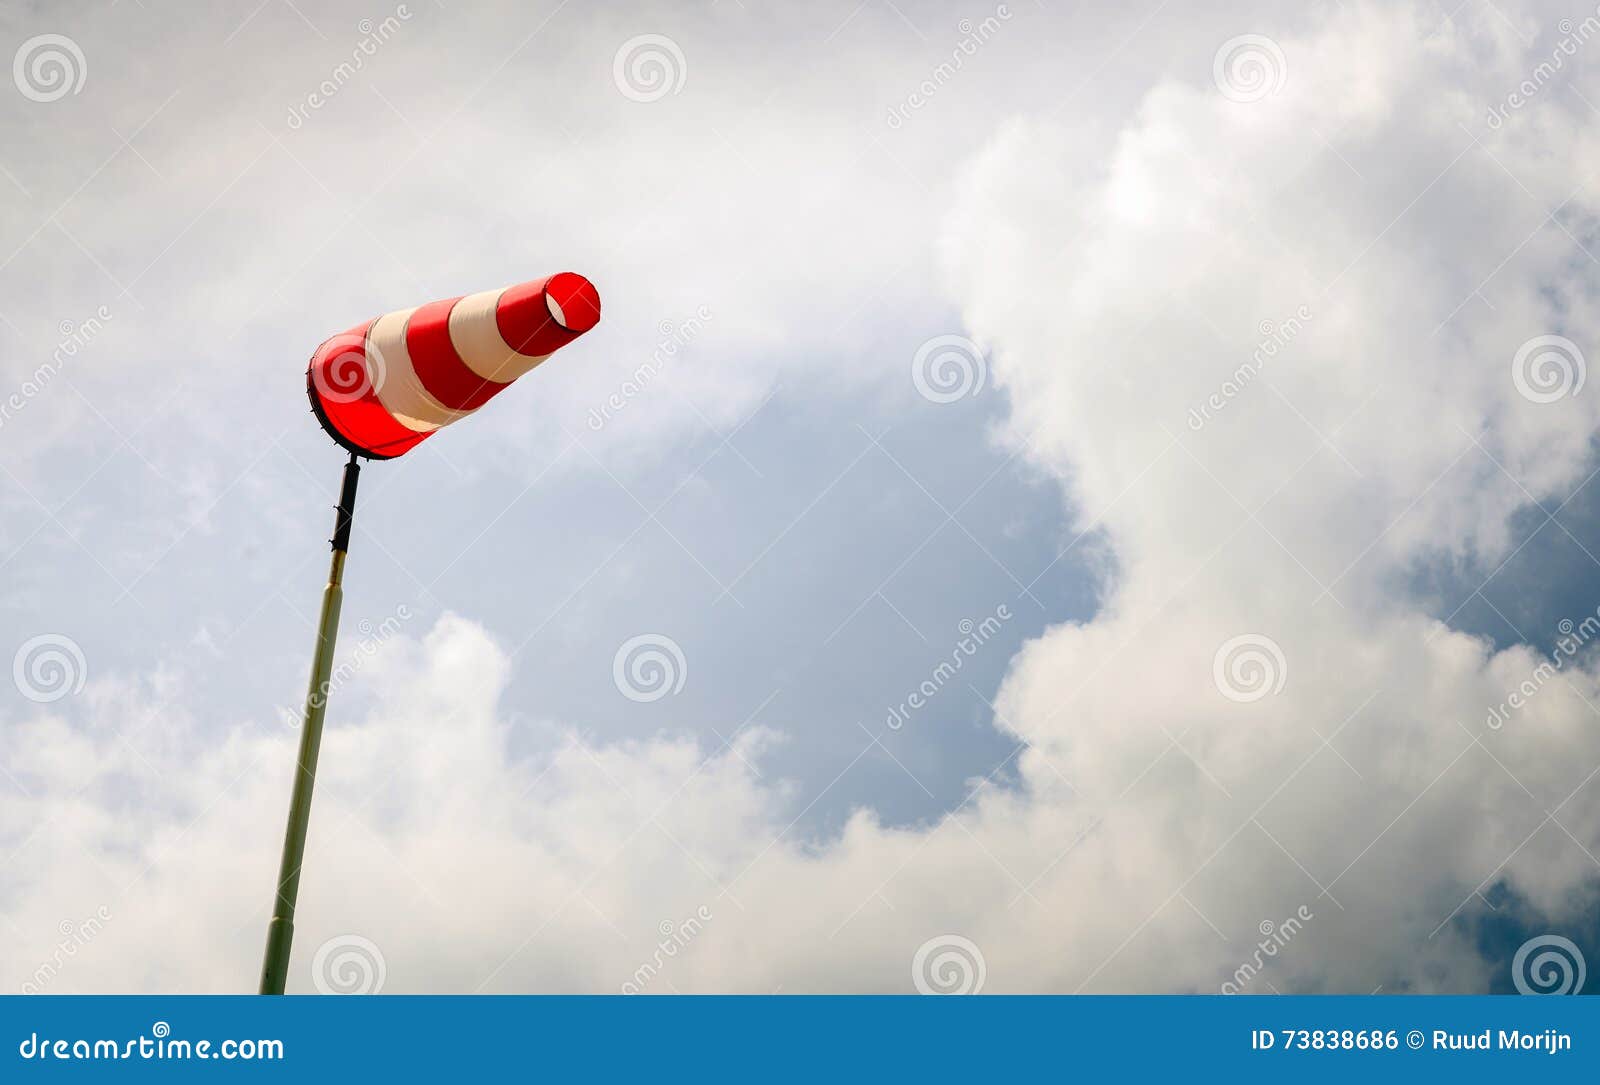 erect red and white windsock on a pole